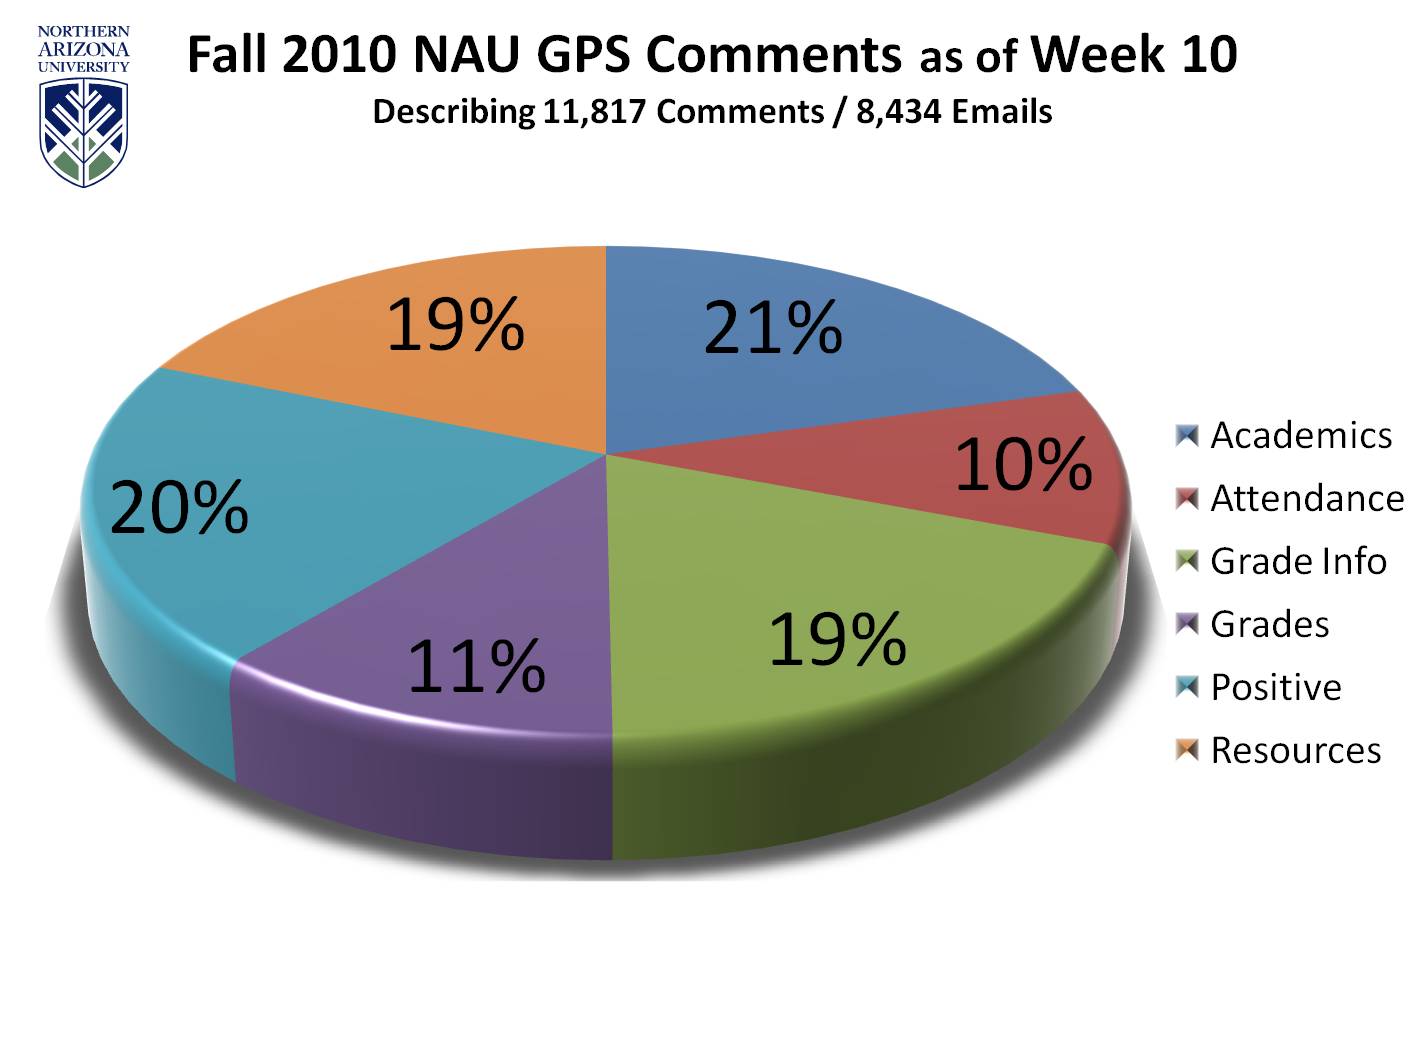 Image is a pie chart Title is Fall 2010 NAU GPS Comments as of Week 10 Subtitle is Describing 11,817 Comments in 8,434 Emails The breakdown of comment types and percentages are: Acadmics- 21% Attendance- 10% Grade Info- 19% Grades- 11% Positive Feedback- 20% Resources- 19%